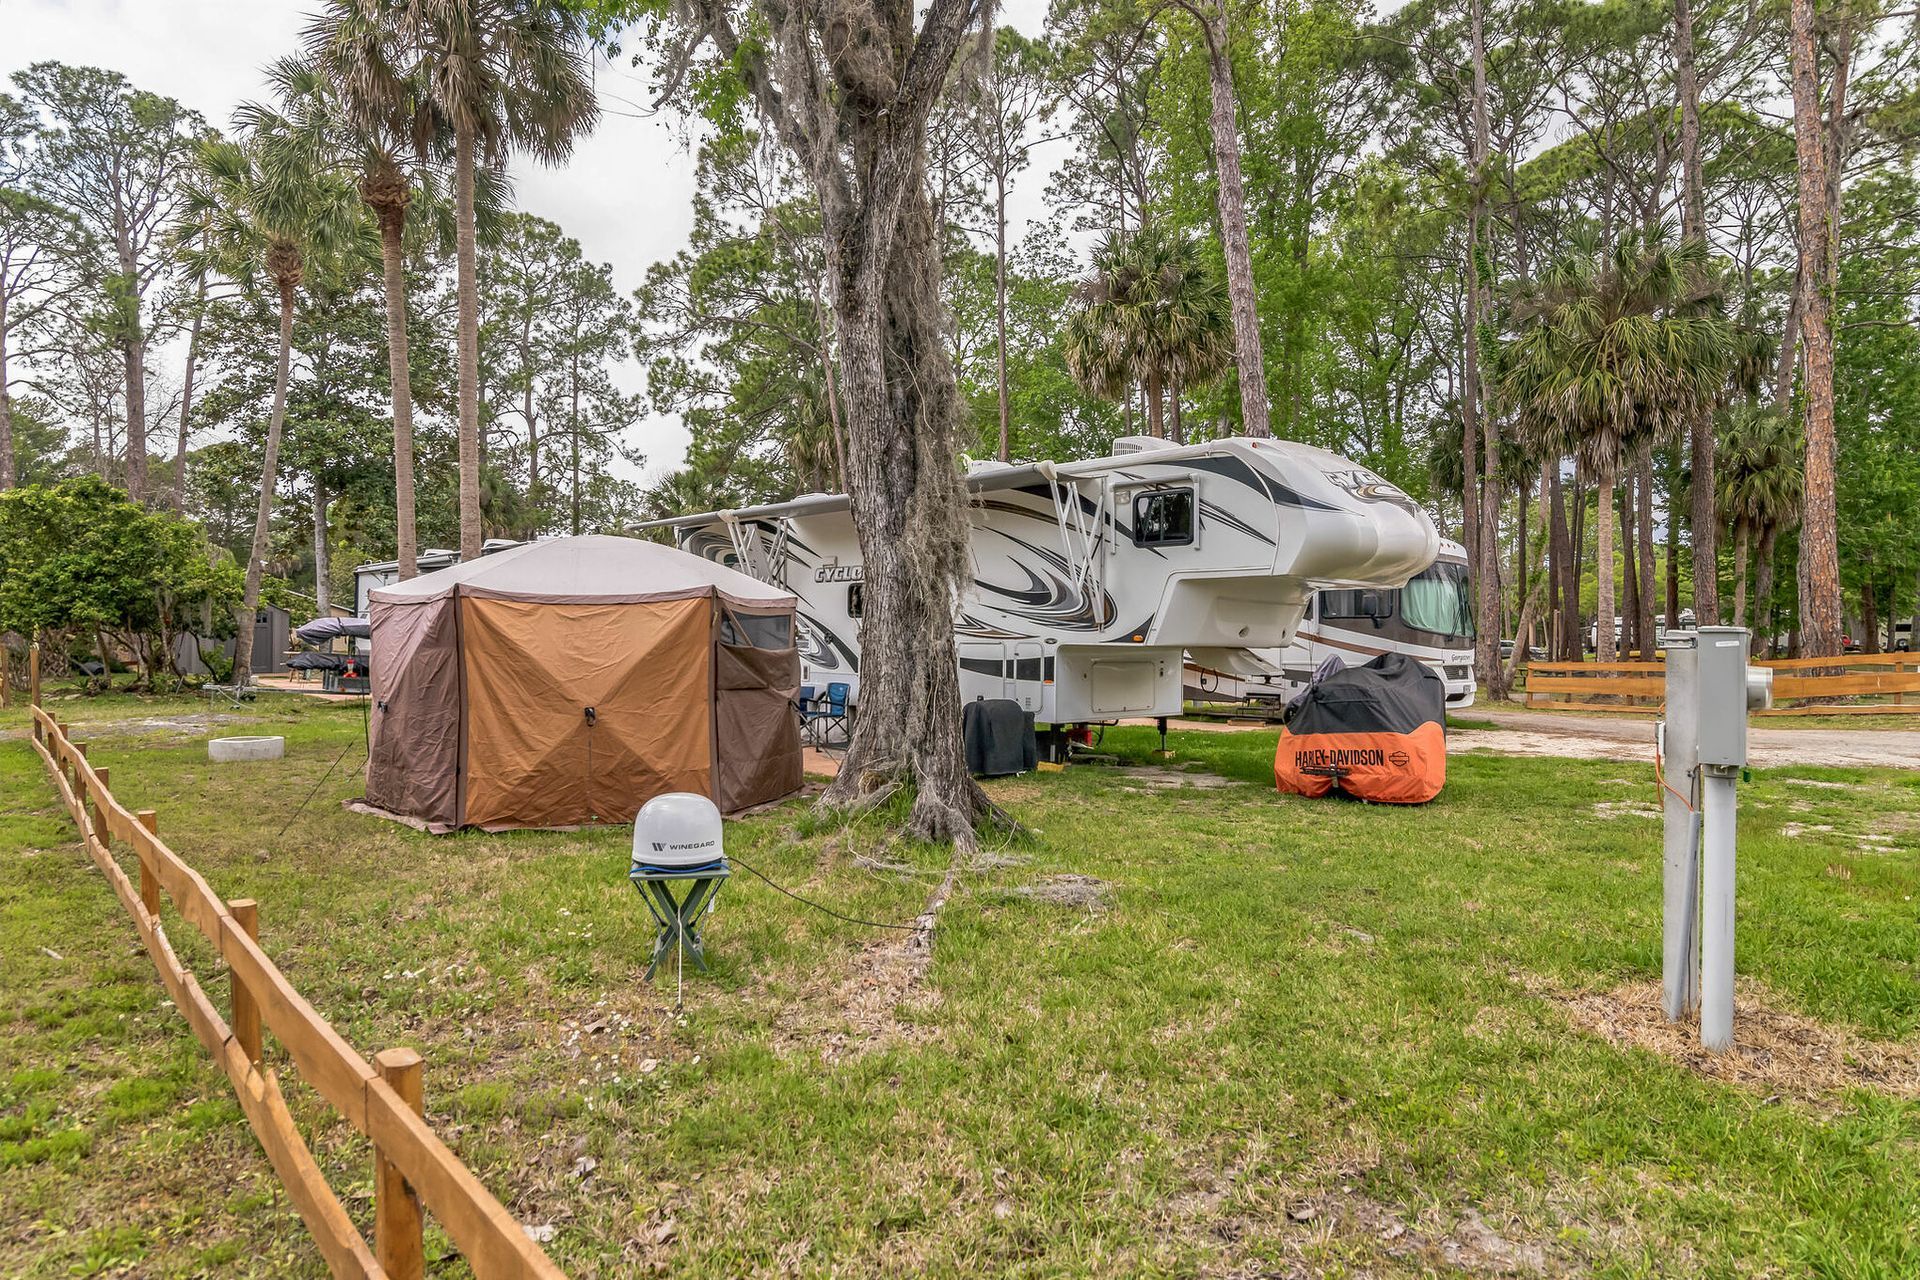 a rv parked in a grassy area next to a tent